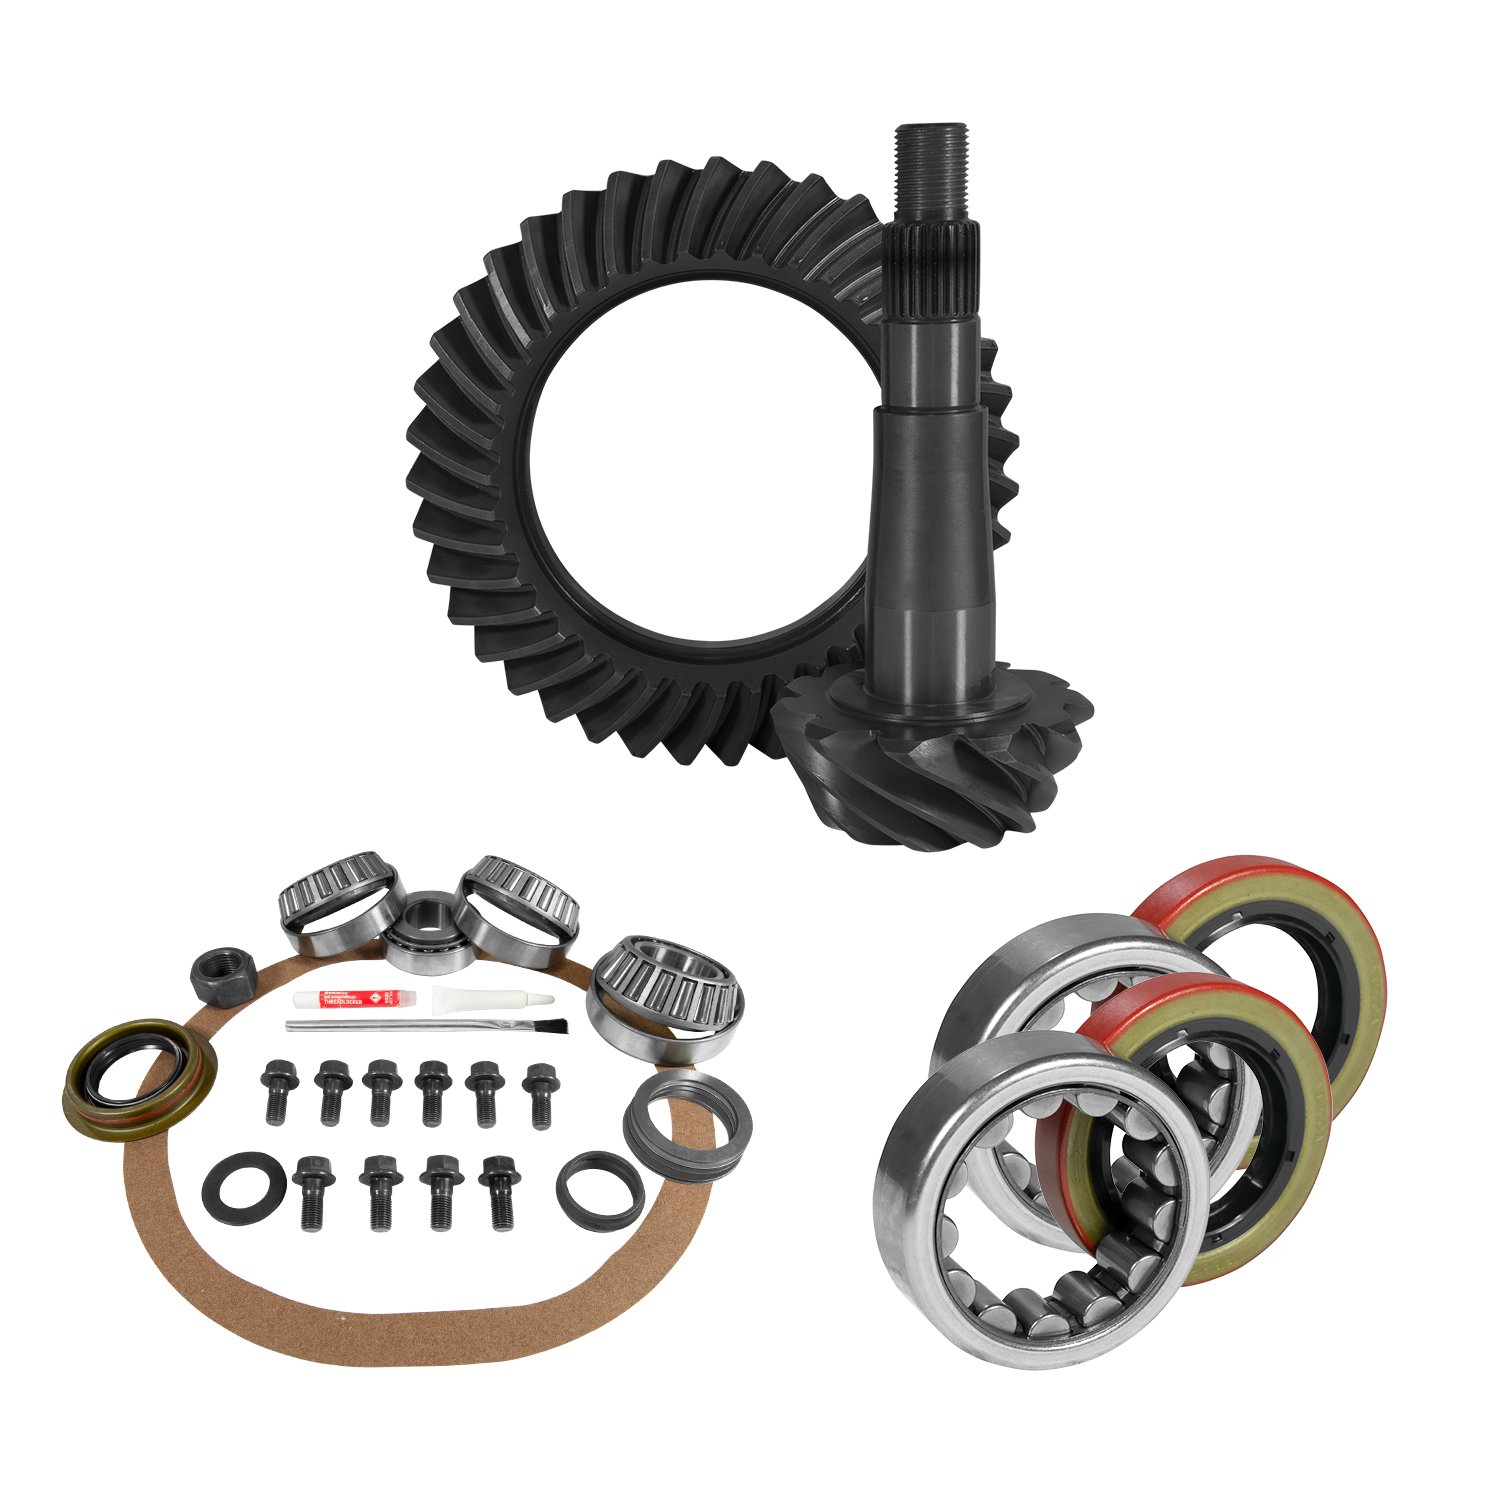 USA Standard 10903 8.25 in. Chy 4.56 Rear Ring & Pinion Install Kit, 1.618 in. Id Axle Bearings & Seals